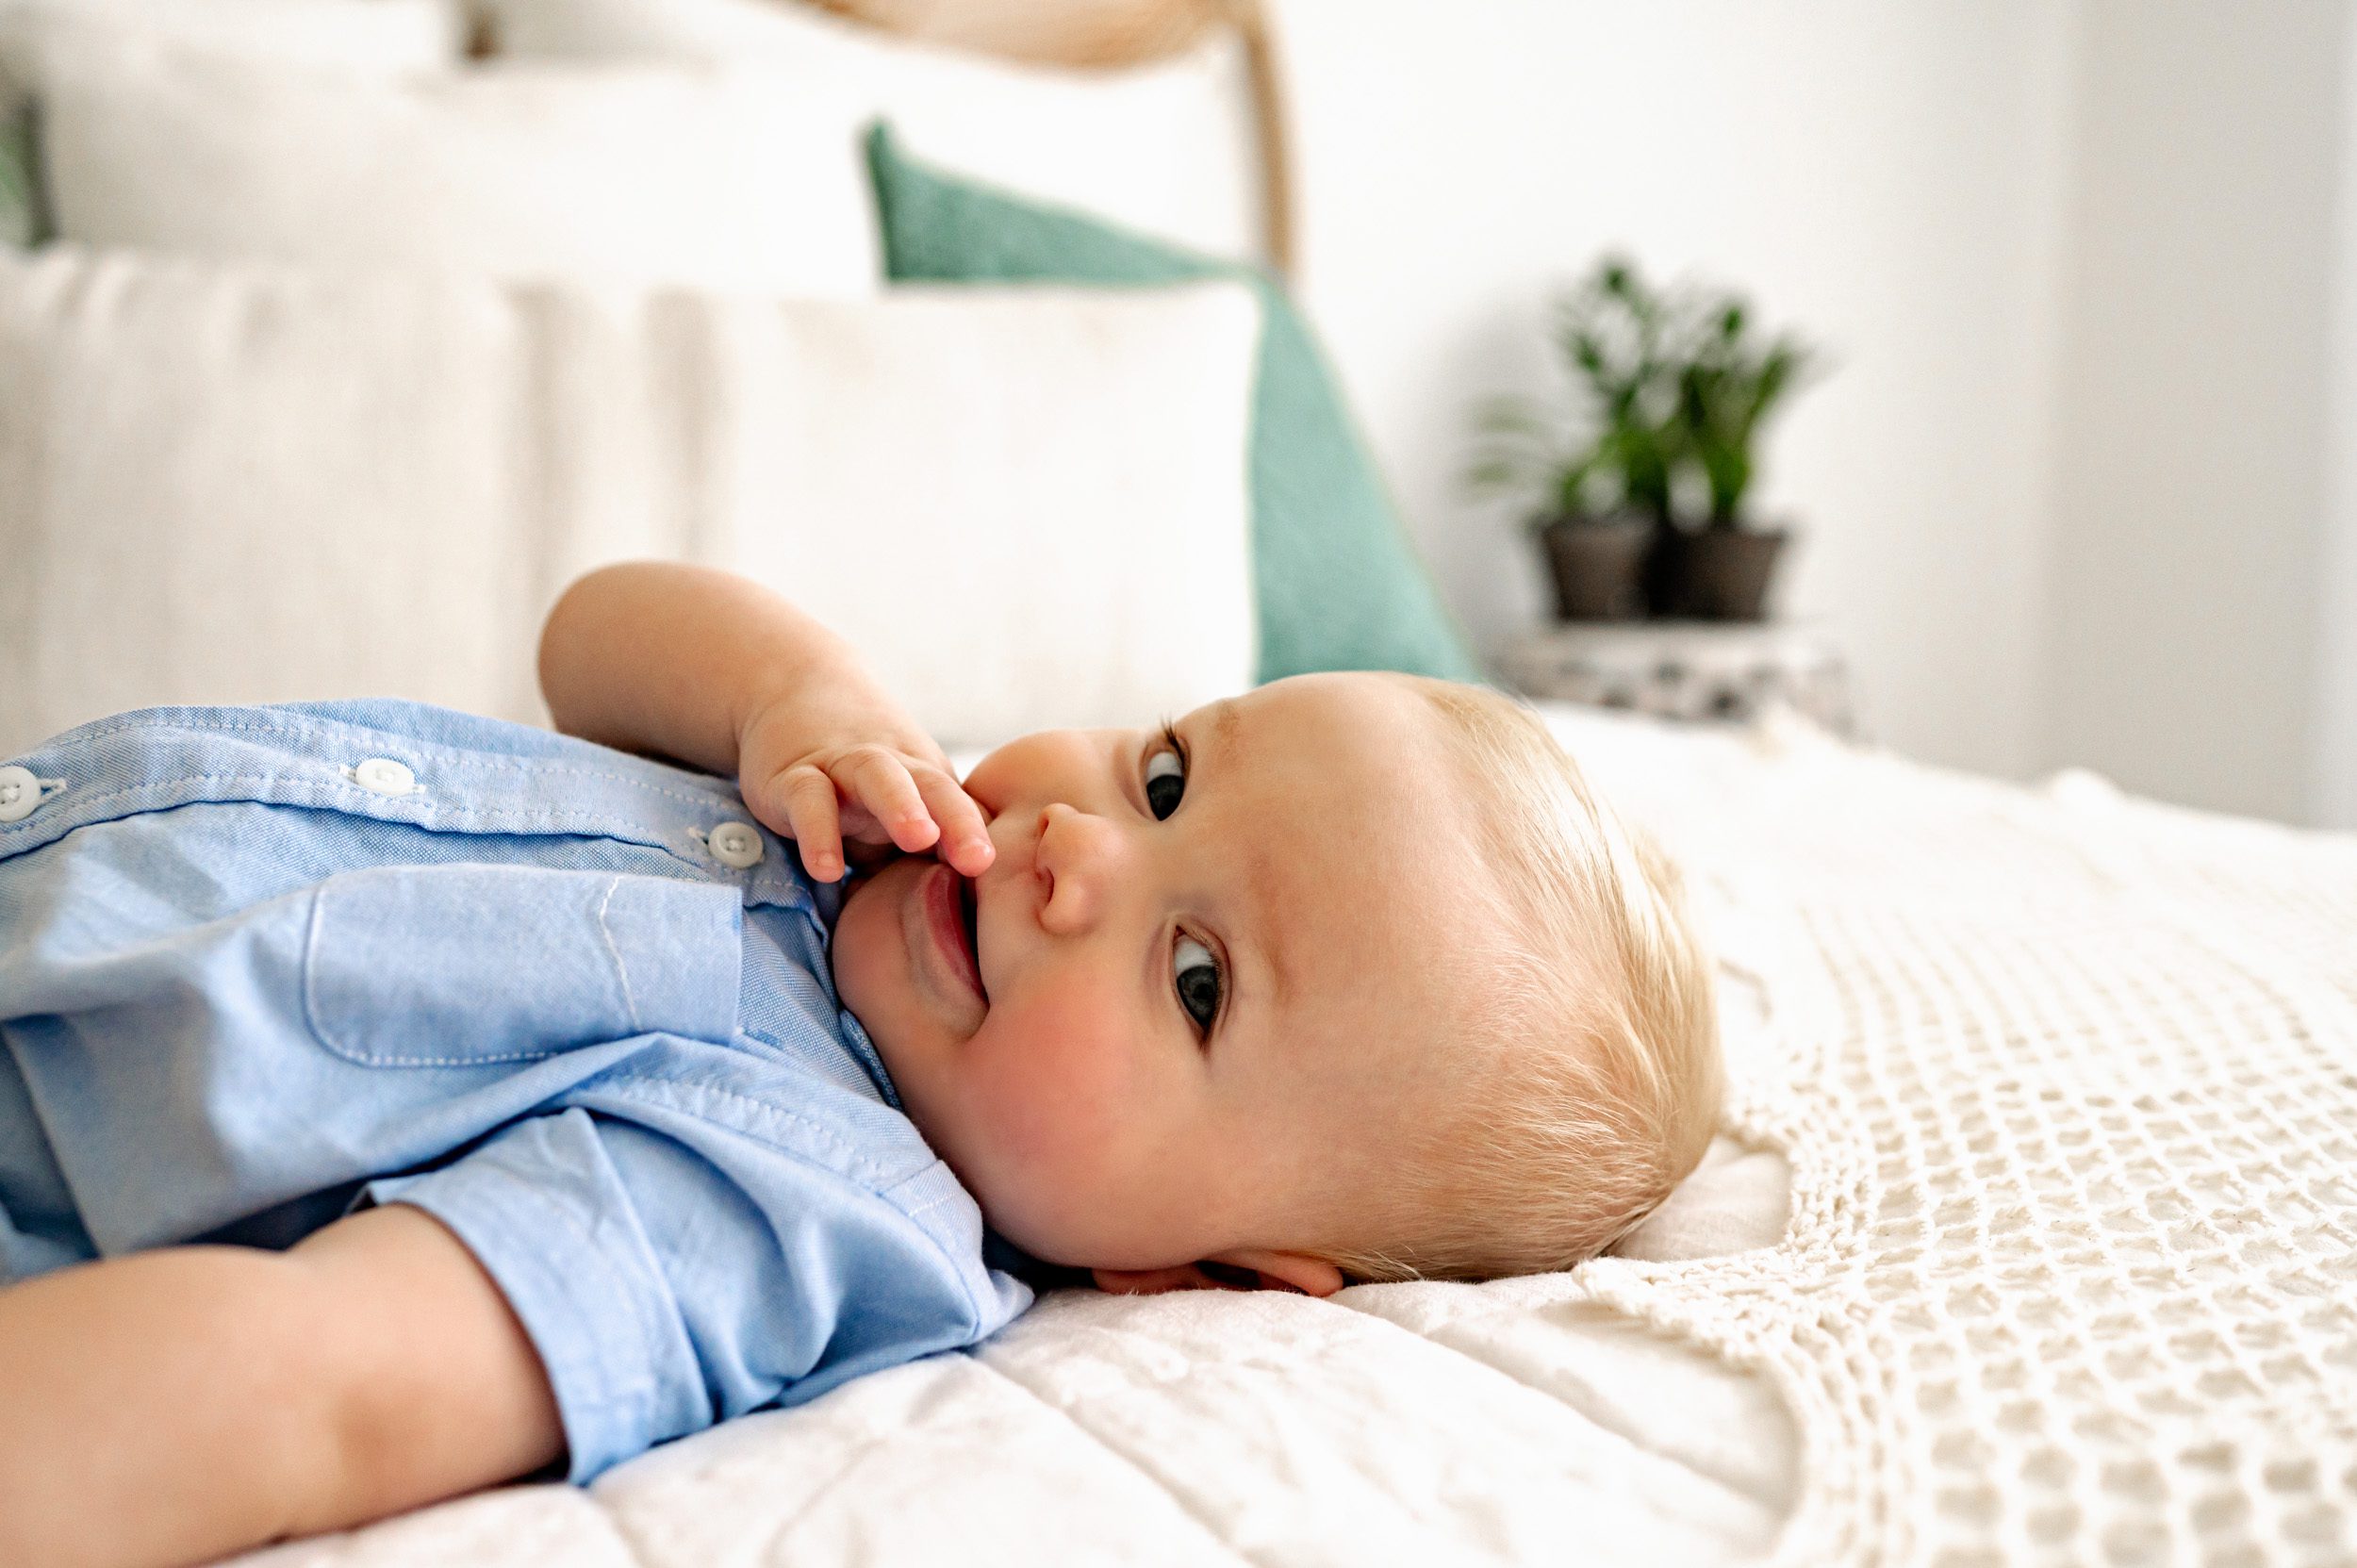 a baby boy laying on a bed and looking shyly toward the camera while he sucks on his finger during a baby milestone photoshoot